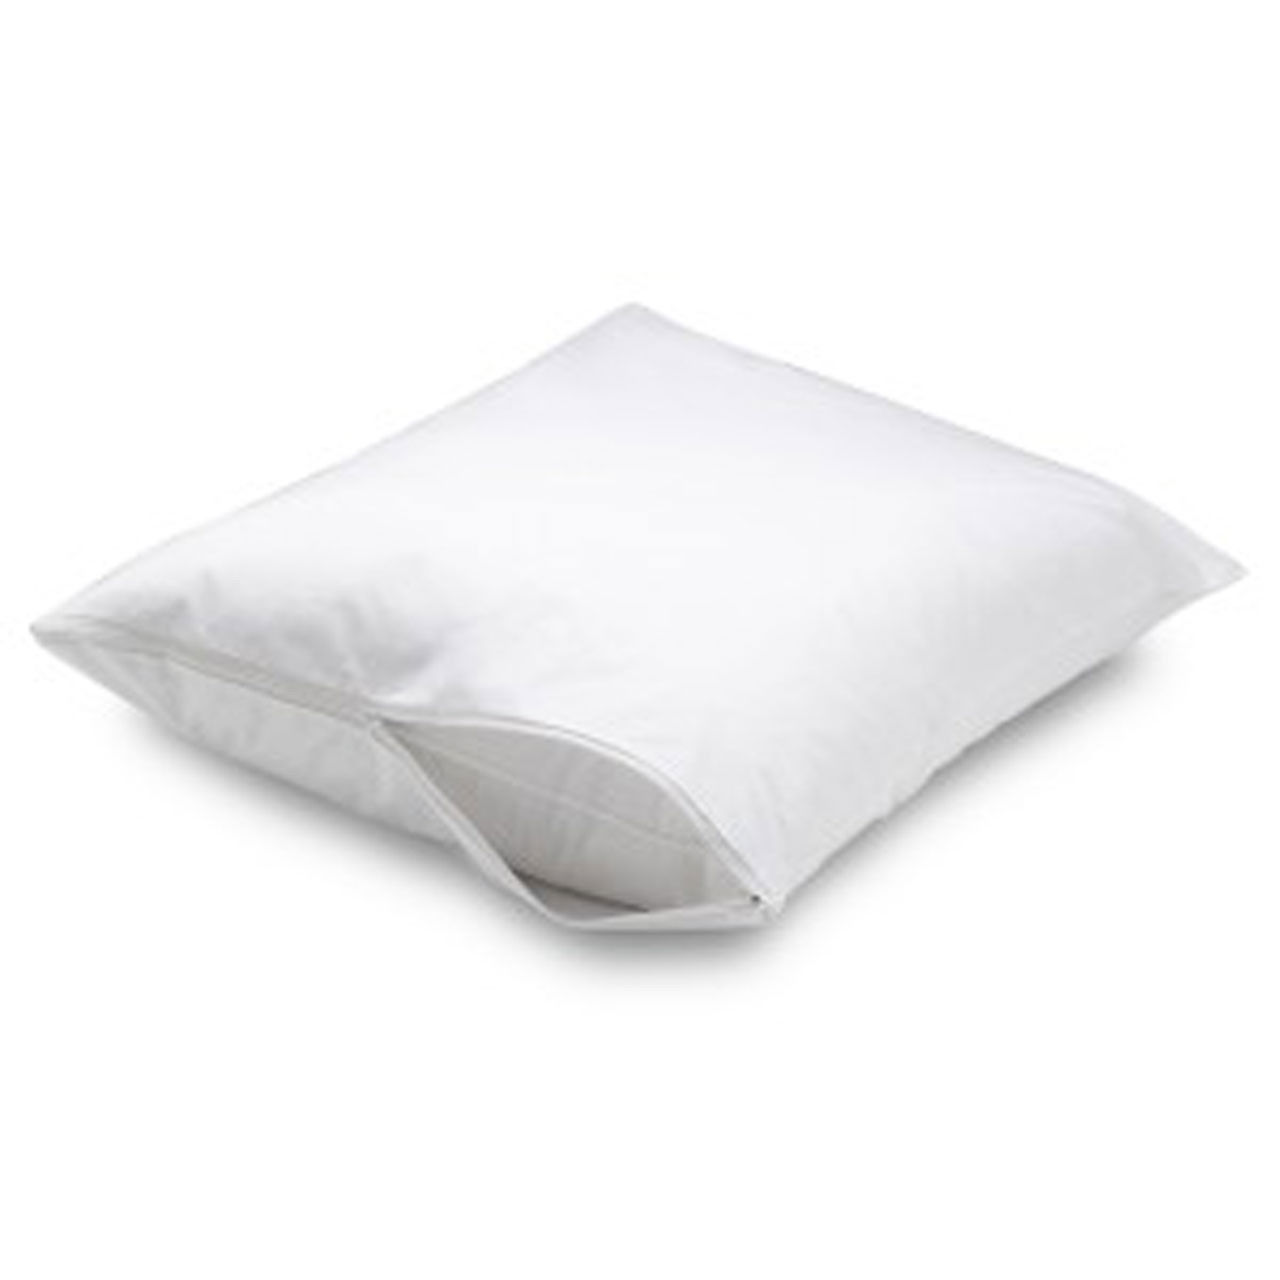 Before buying bulk pillow protectors, do I need to iron the Woven Zippered ones?